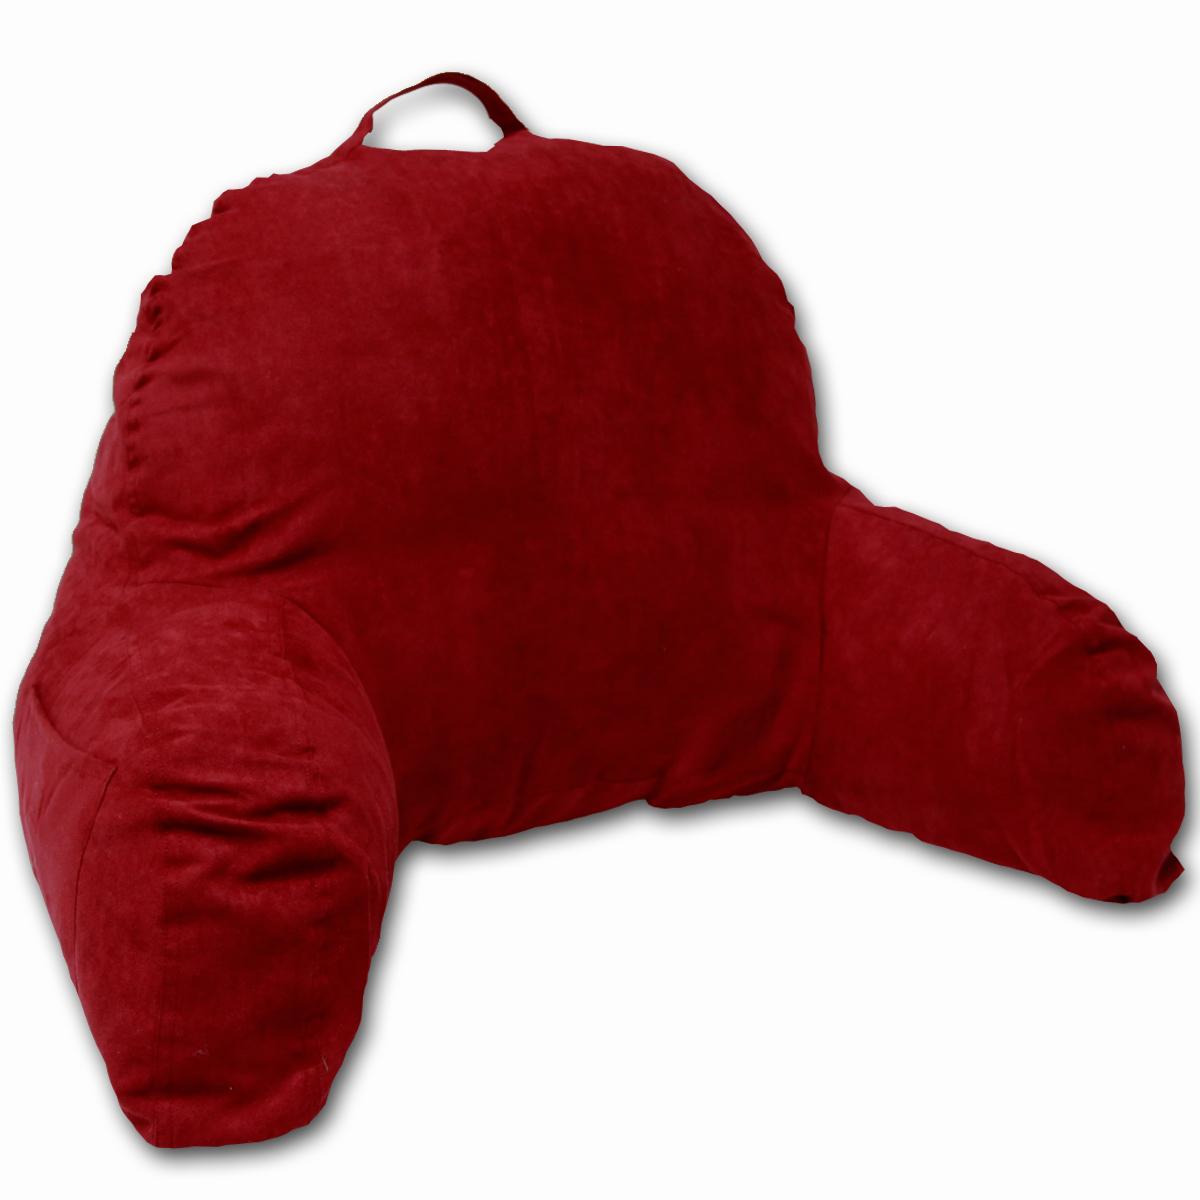 Cozy Quarters Microsuede Bedrest Pillow - Red - BED REST READING PILLOW